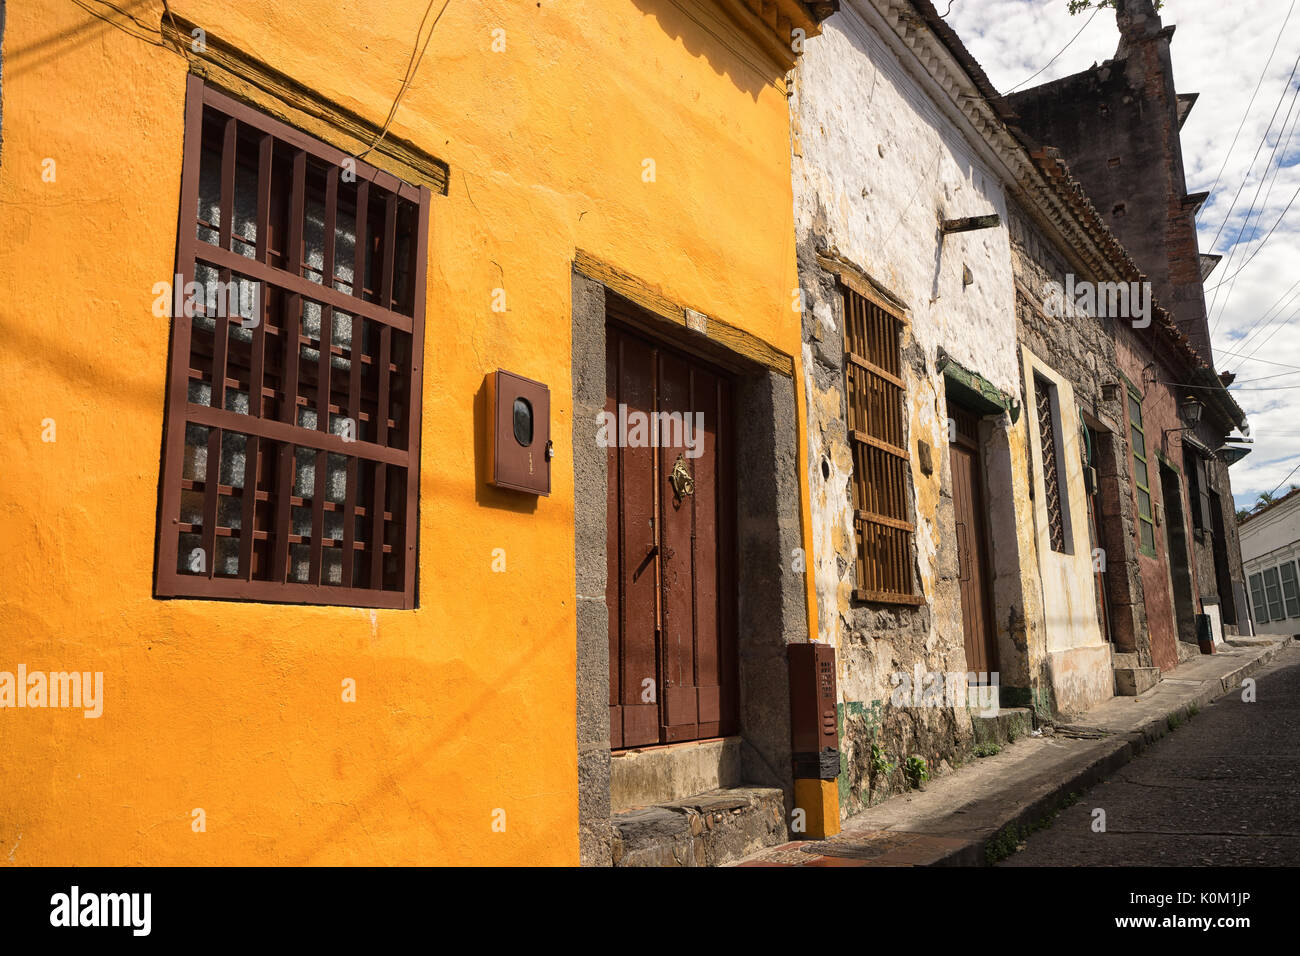 colonial architecture in Honda Colombia Stock Photo